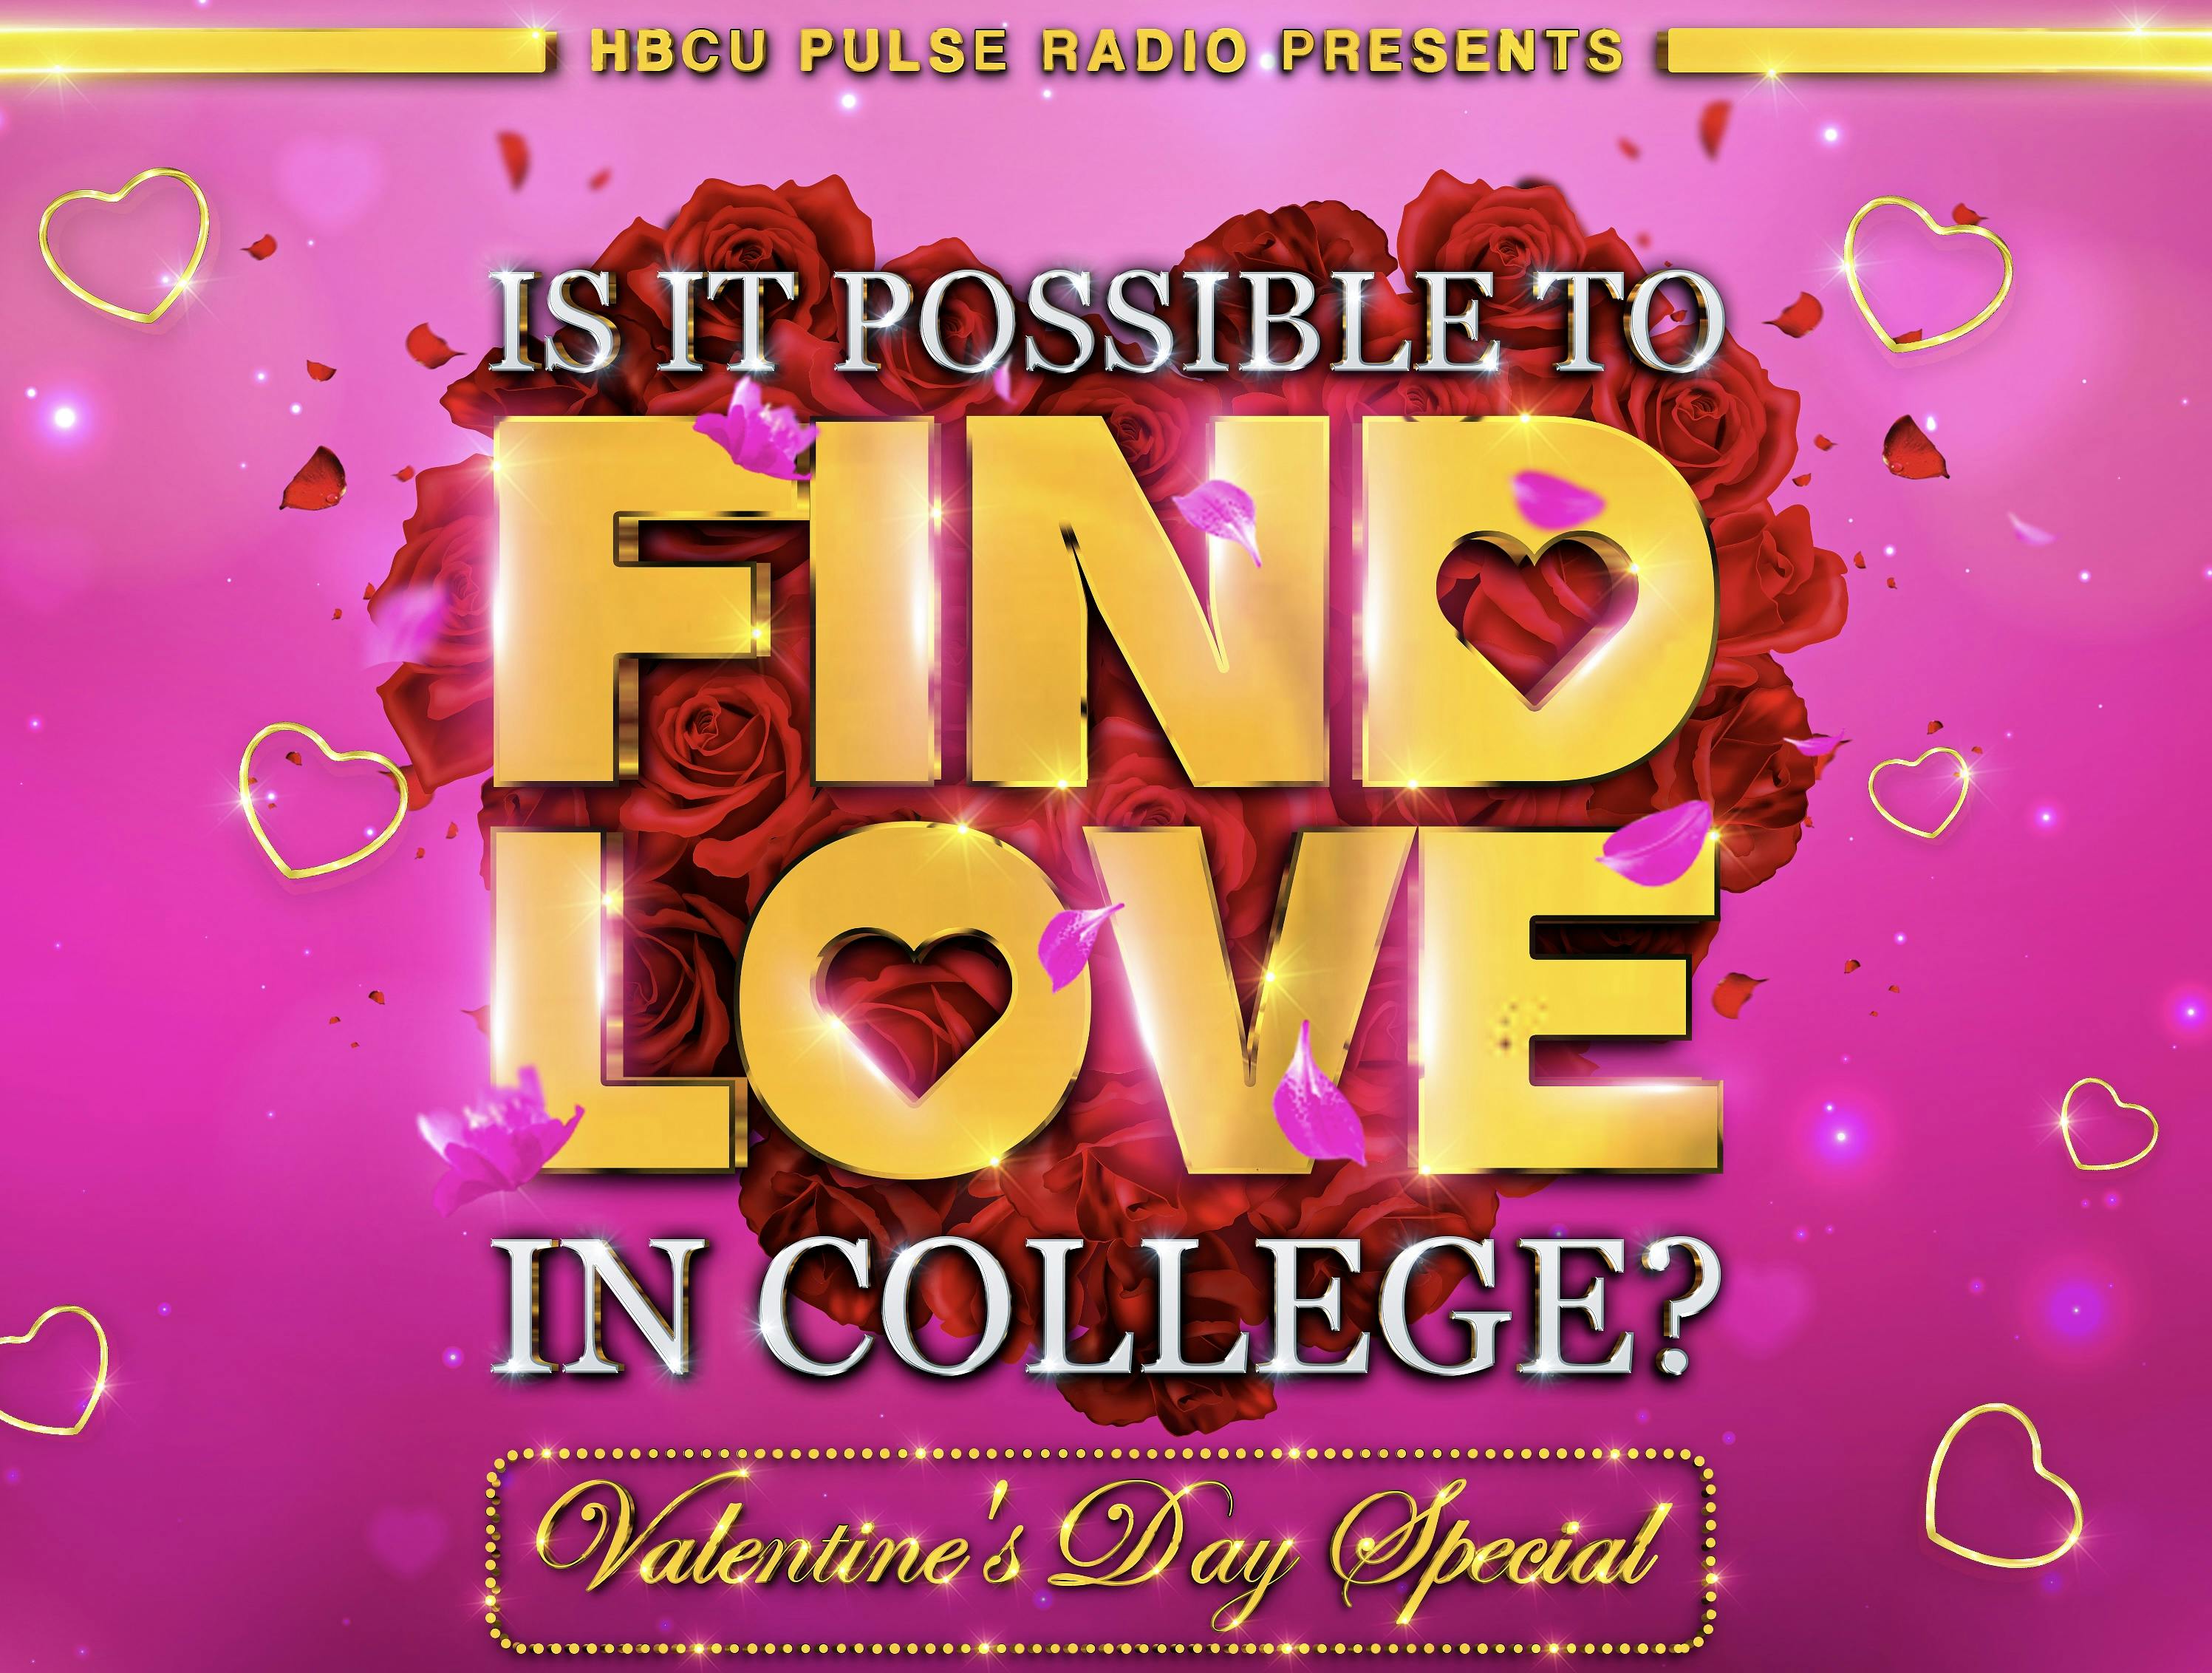 Is It Possible To Find True Love In College (HBCU Pulse Valentine’s Day Special)